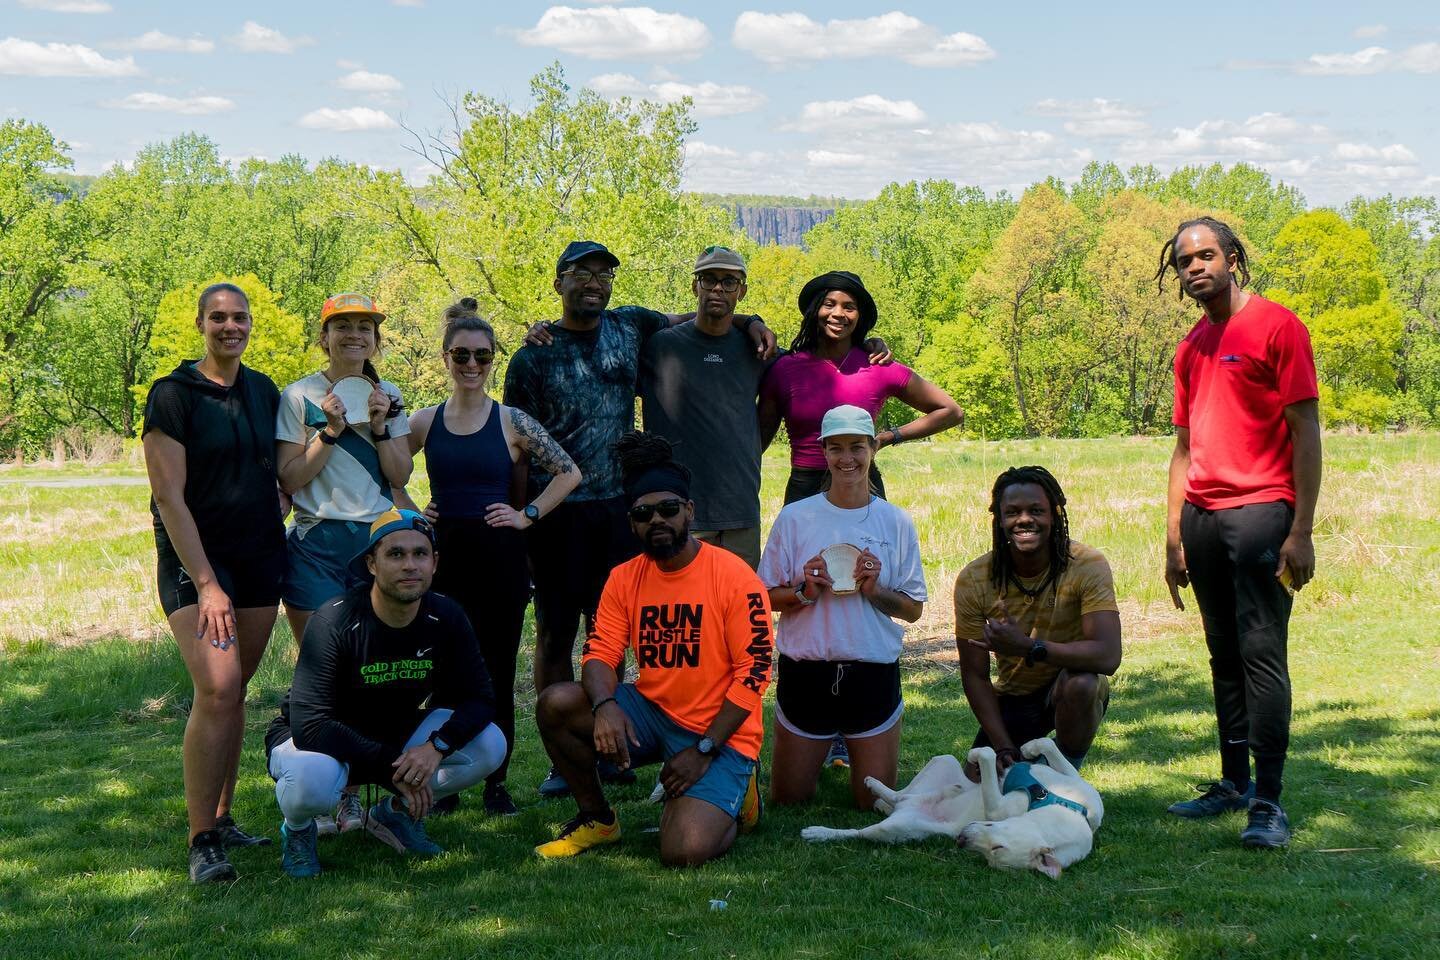 Trail days are blessed days 🌳🍃 
Give thanks to @madnames &amp; @gemma.kitchen for organizing this run with I&amp;I! 

Thanks to all the ones that came out! If you missed it, there will be more opportunities to join the nature energy next time 🌞🏃?